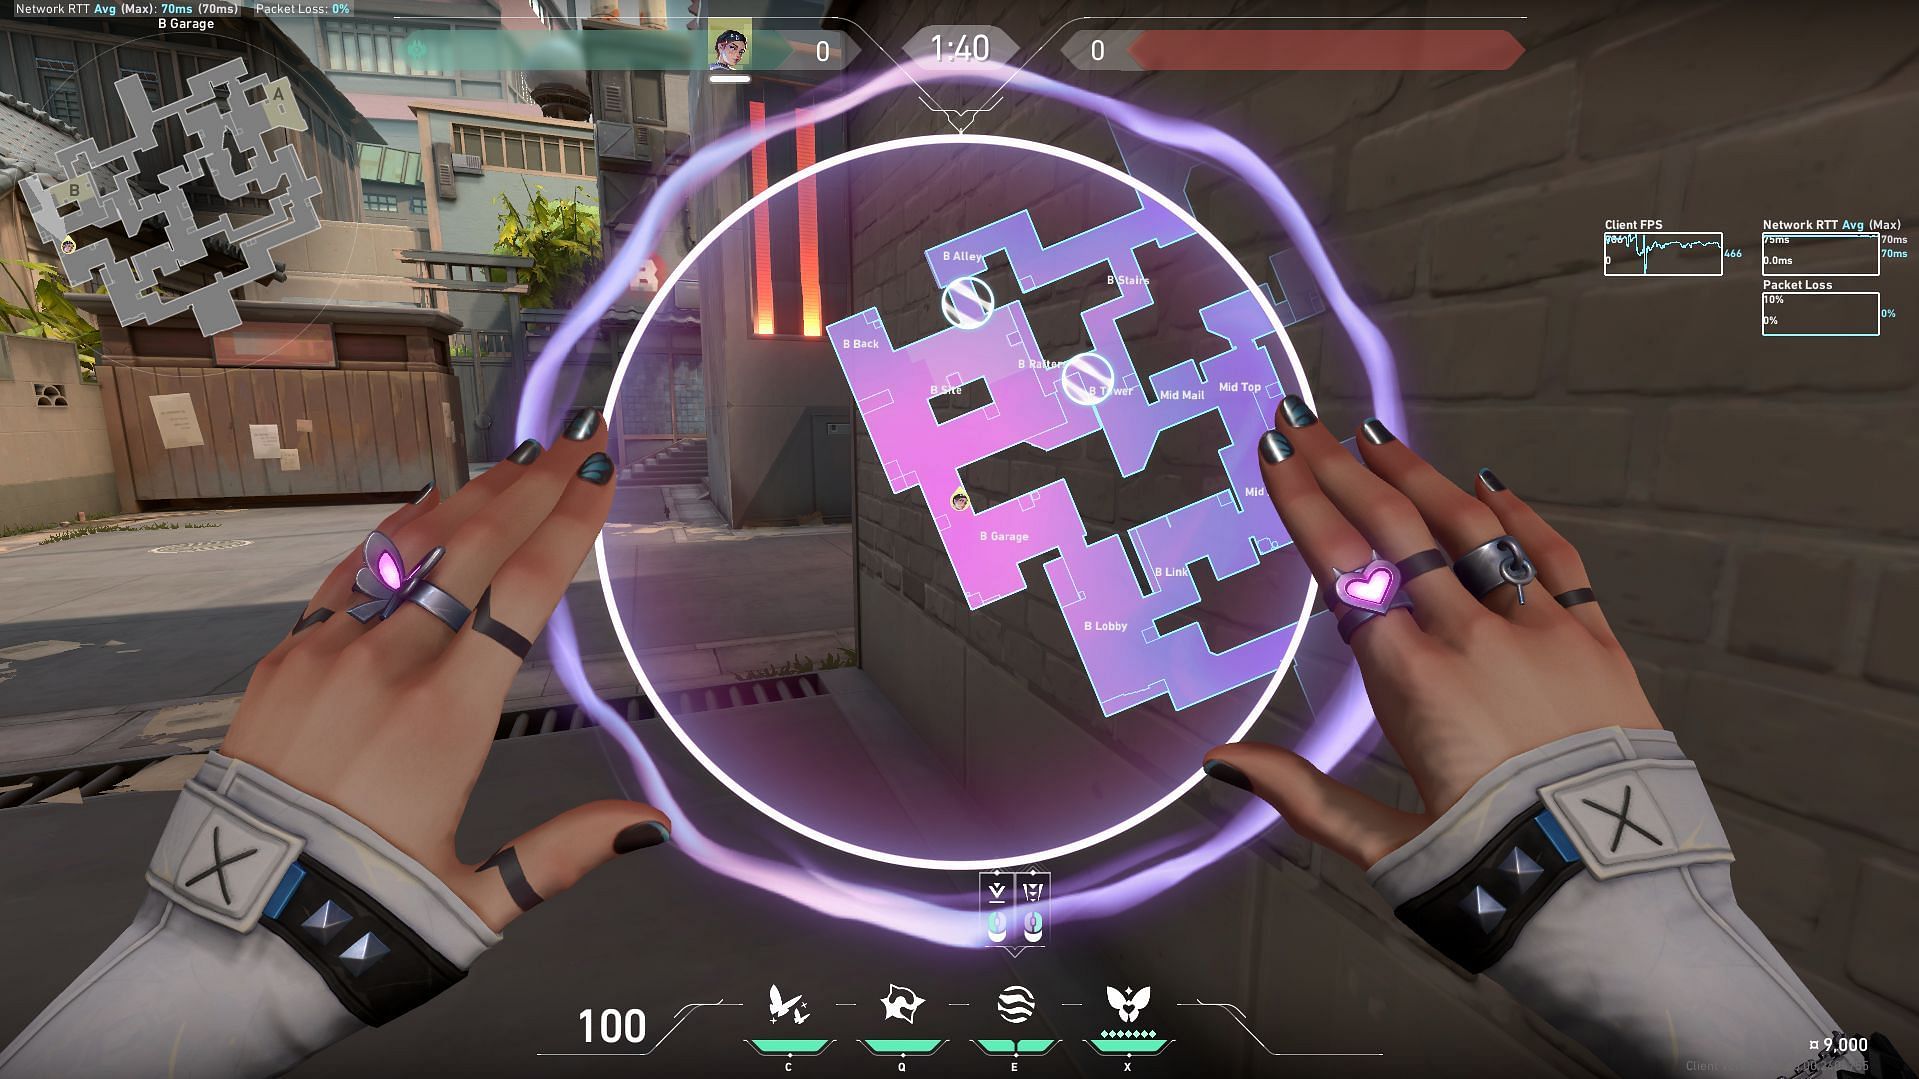 B-Site attacking smokes tactical map view (Image via Riot Games)